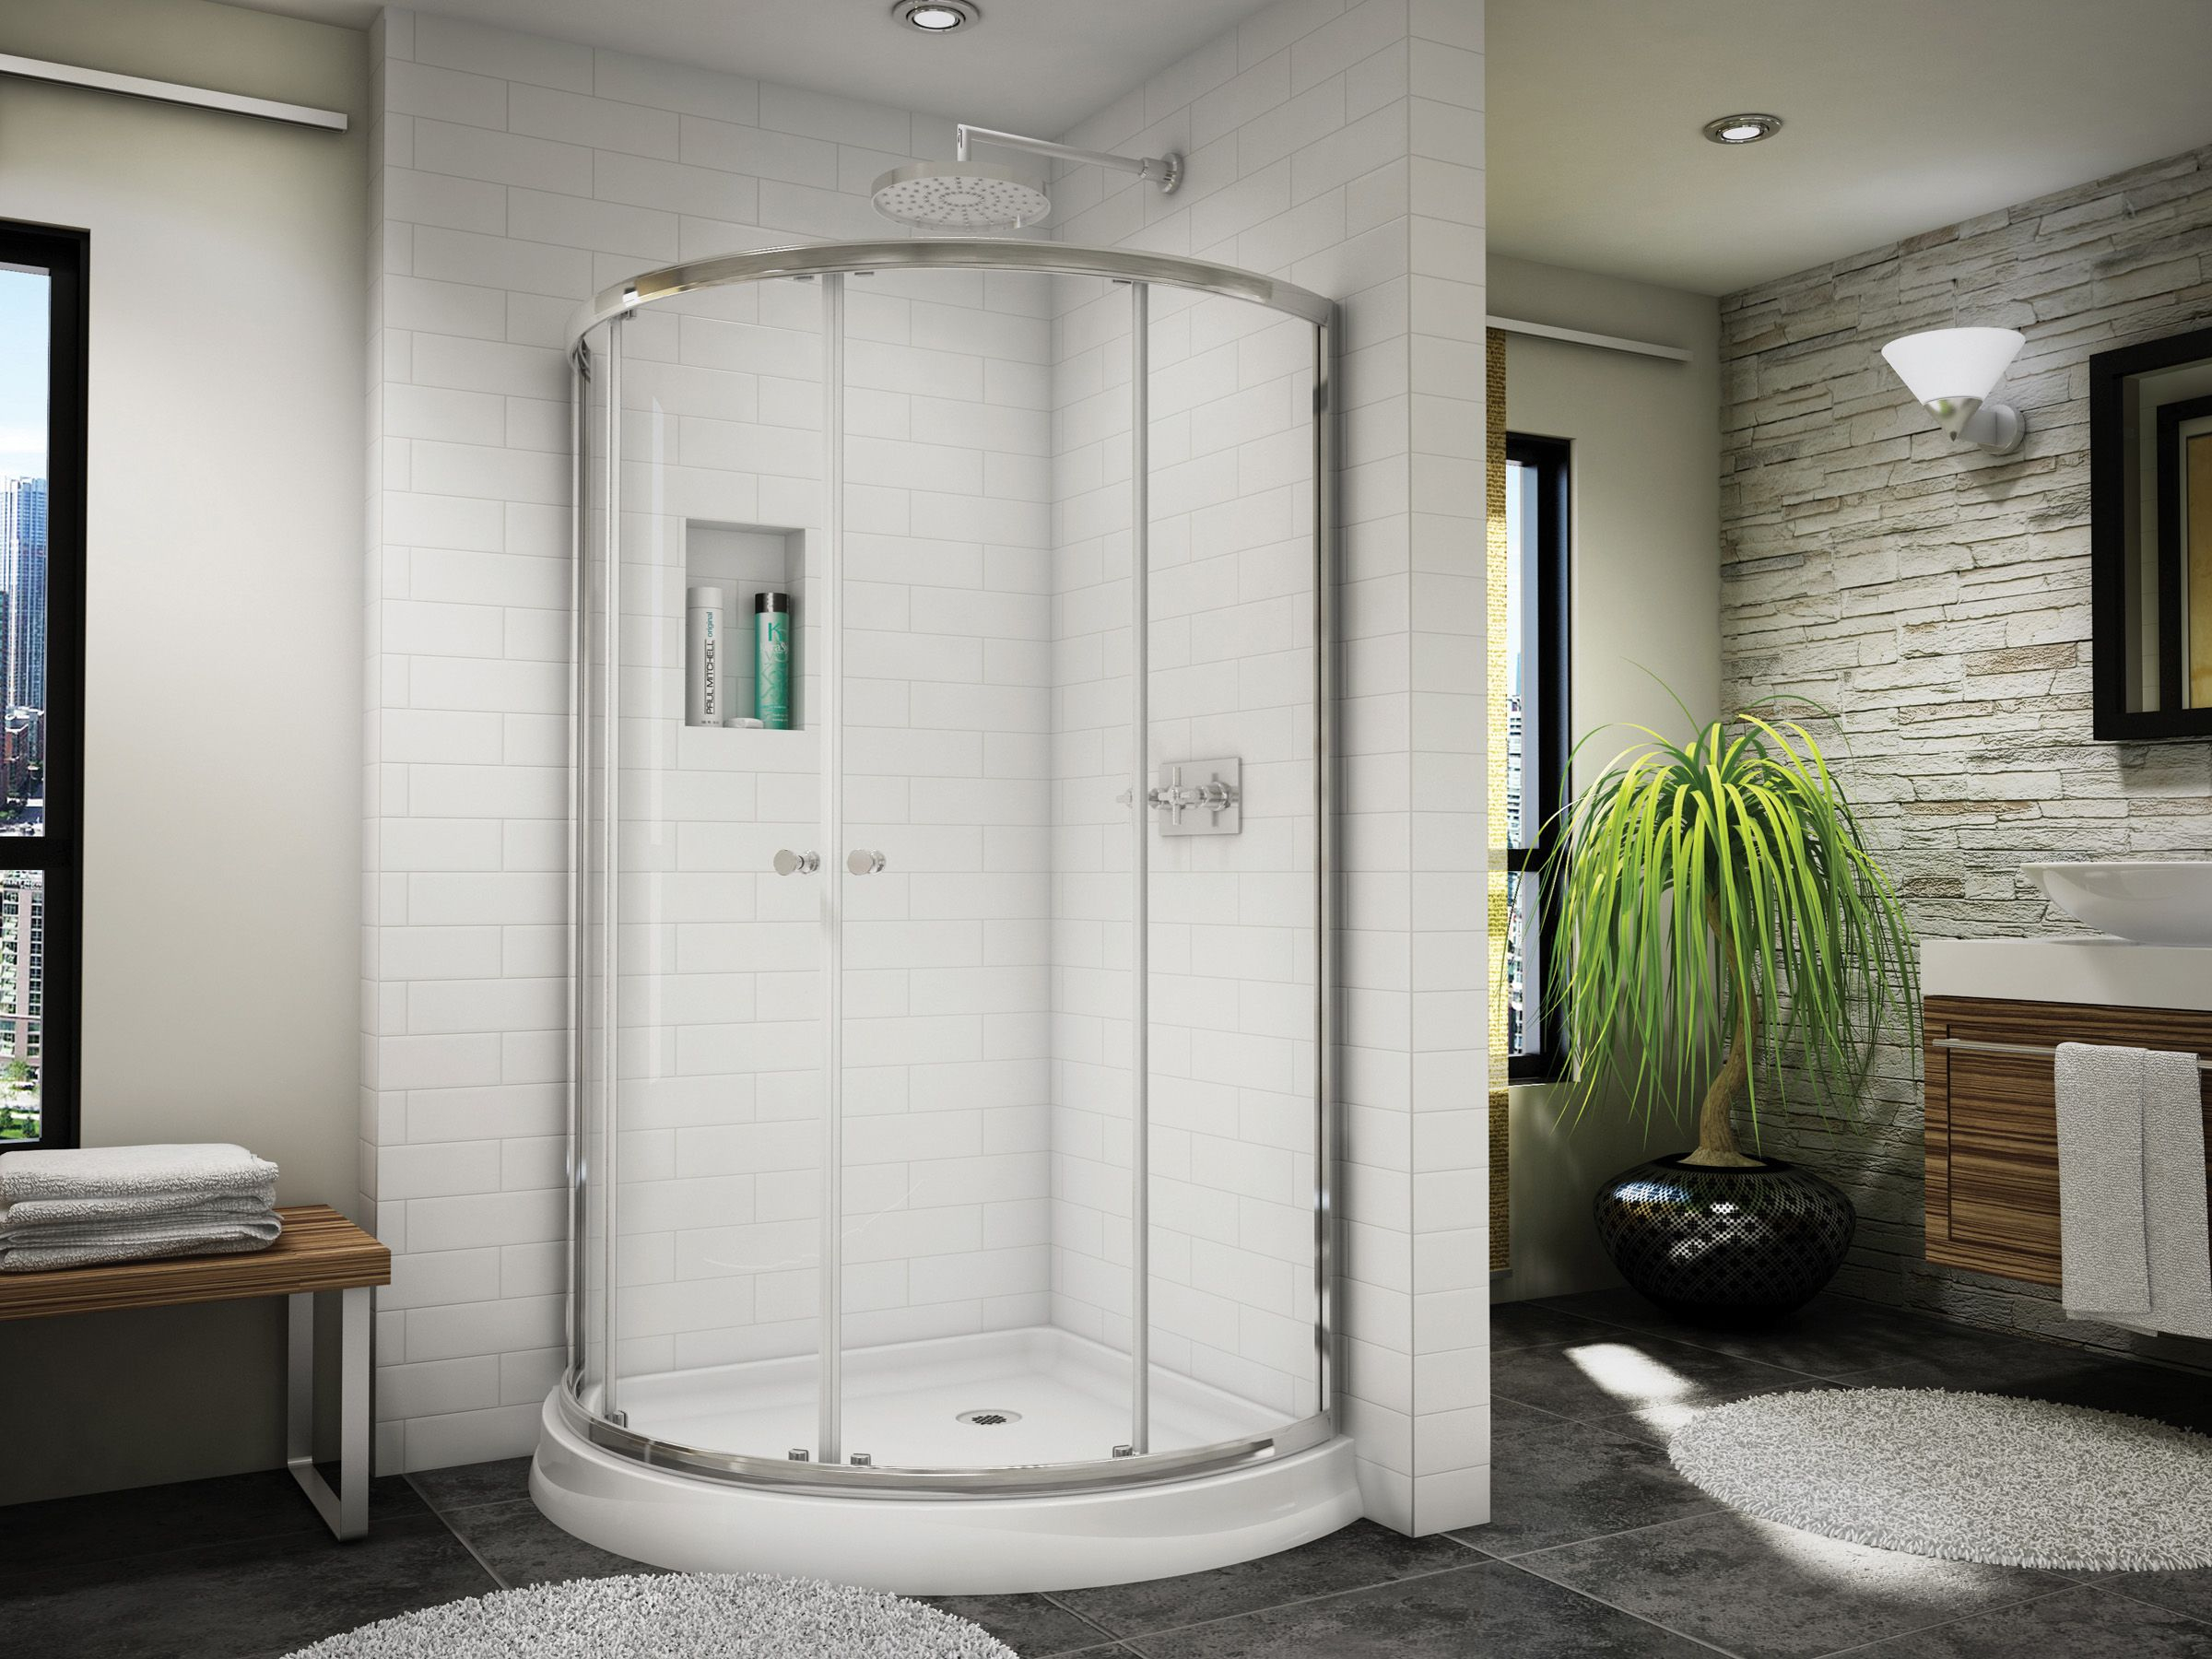 Fleurcos 4 Semi Frameless Sliding Shower Door Banyo Collection within dimensions 2400 X 1800